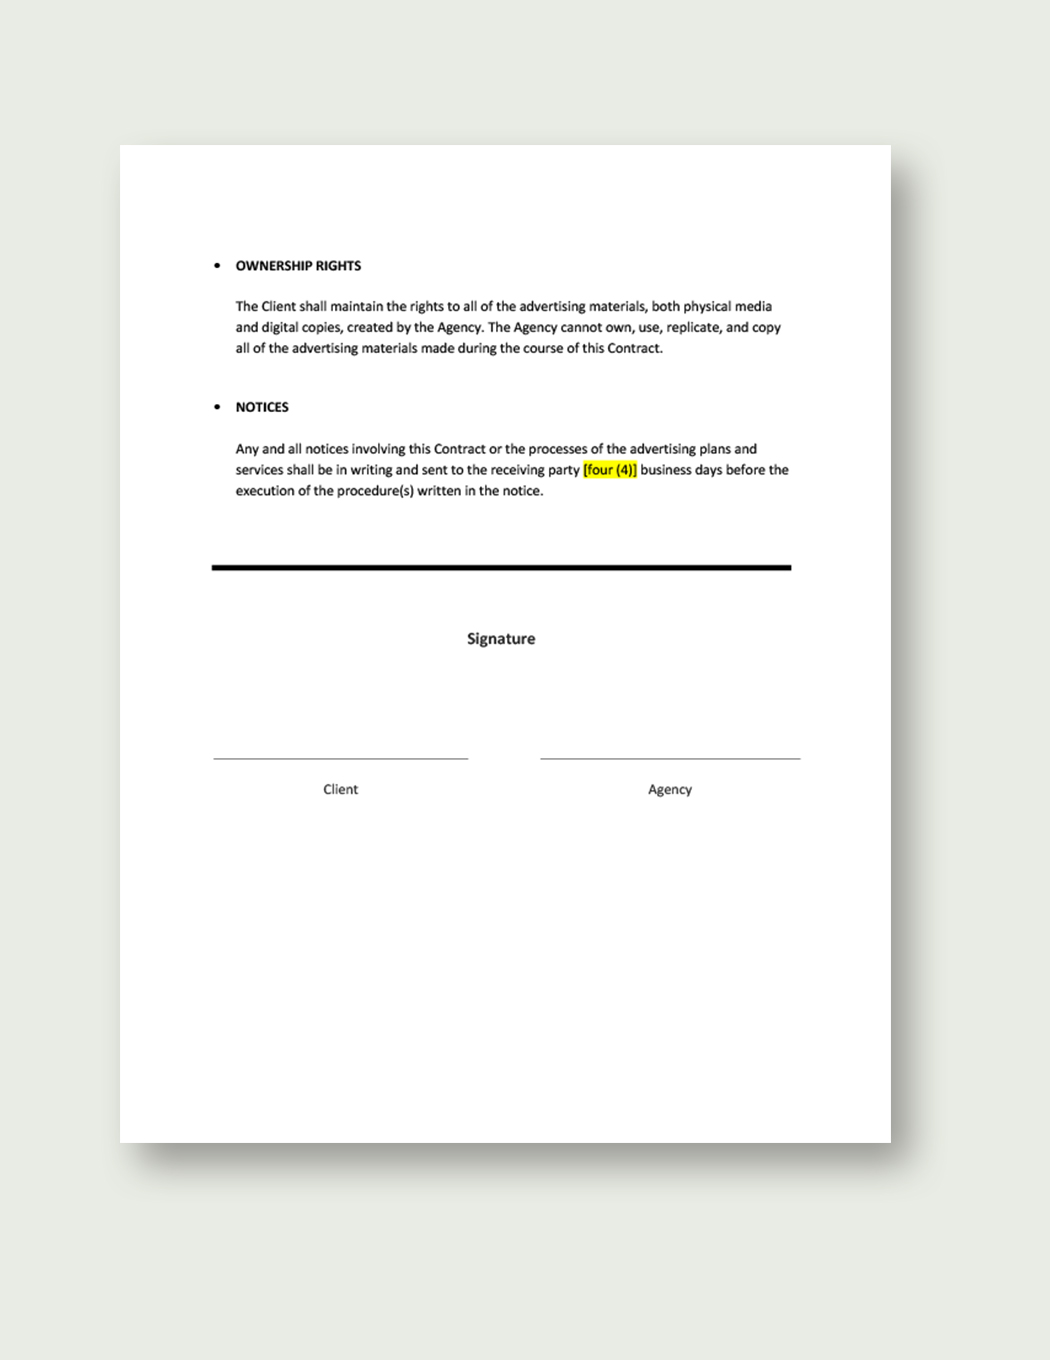 Sample Business Contract for Advertising Agency